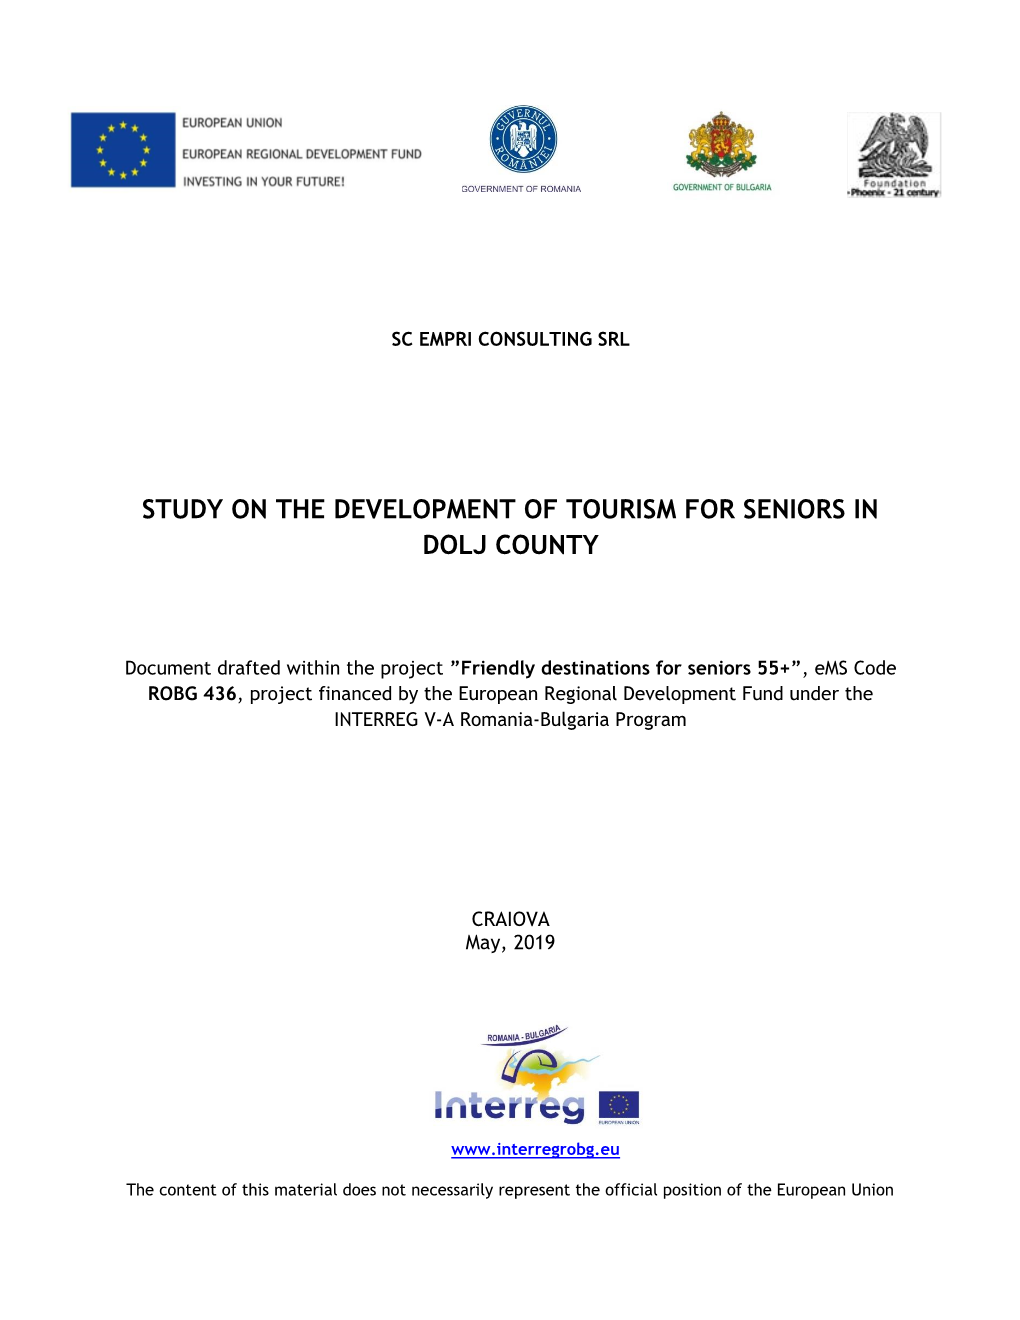 Study on the Development of Tourism for Seniors in Dolj County